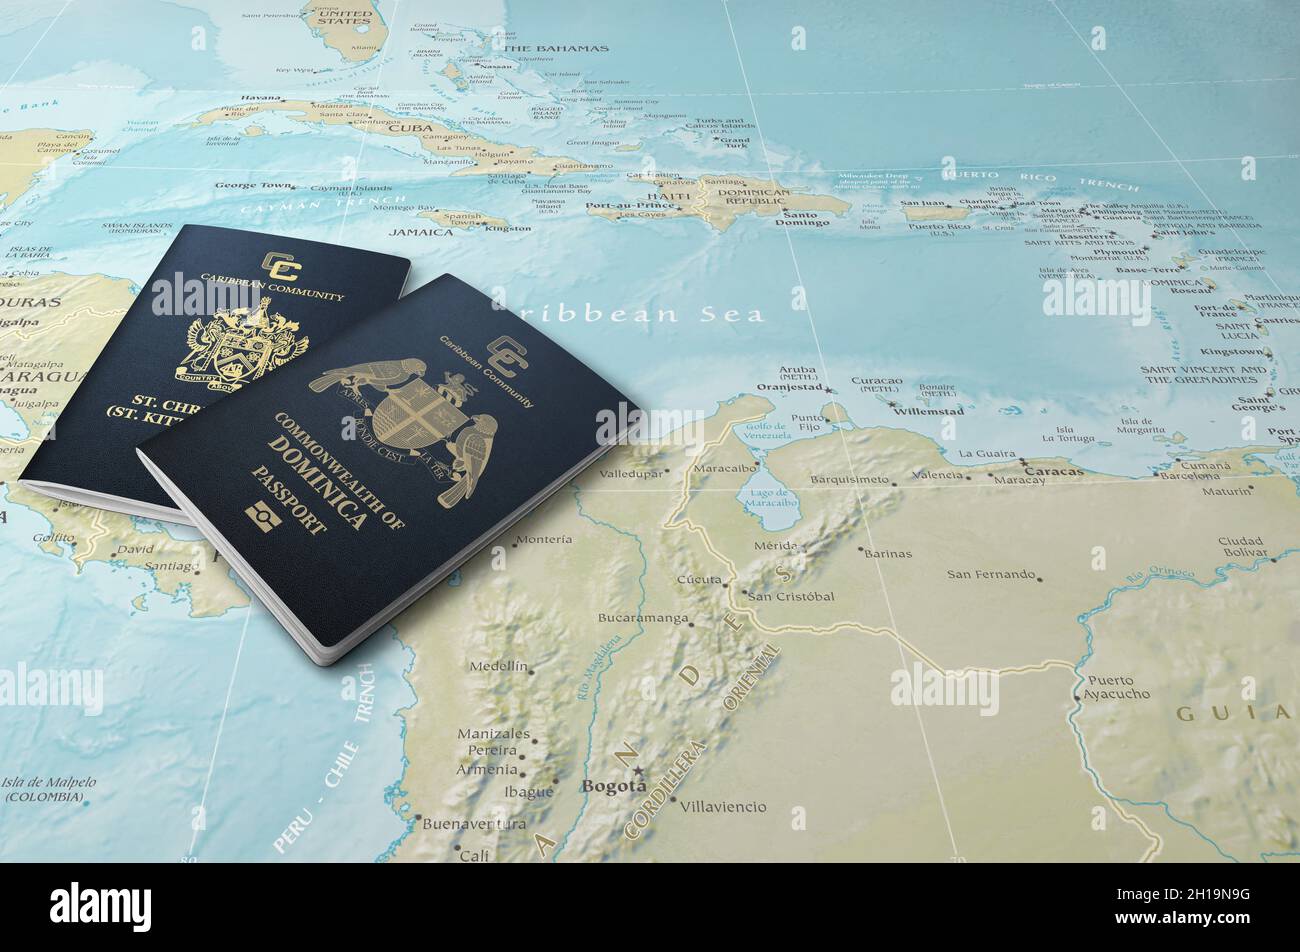 Passports of two Caribbean states, Saint Kitts and Nevis and Dominica on a map of the Caribbean Sea Stock Photo